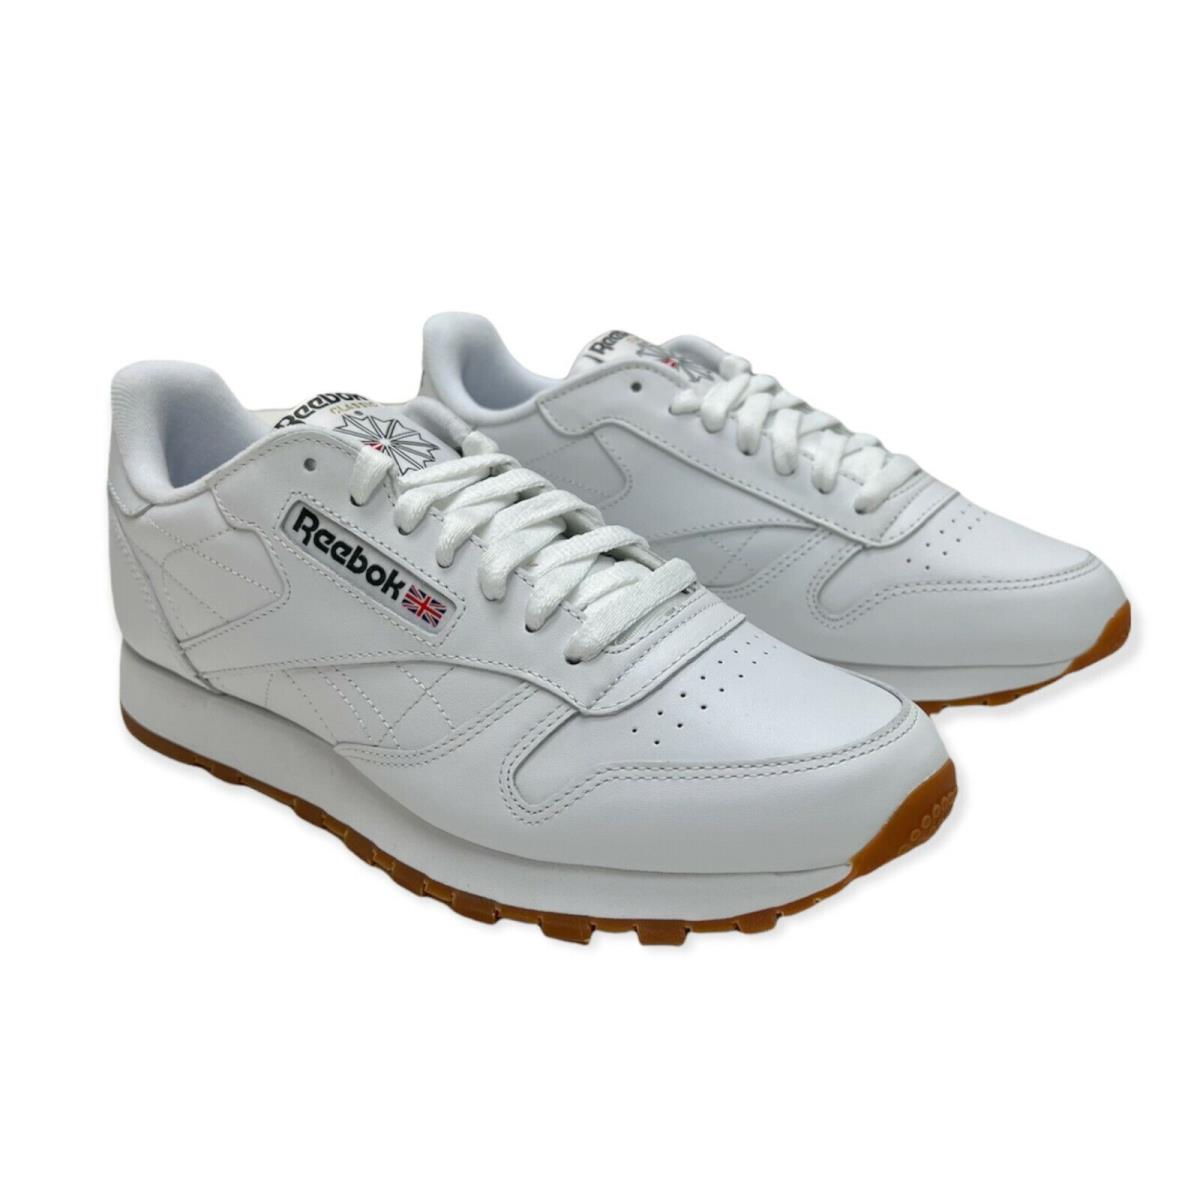 Reebok Mens Classic White Leather CL Low Top Athletic Shoes Size 8.5